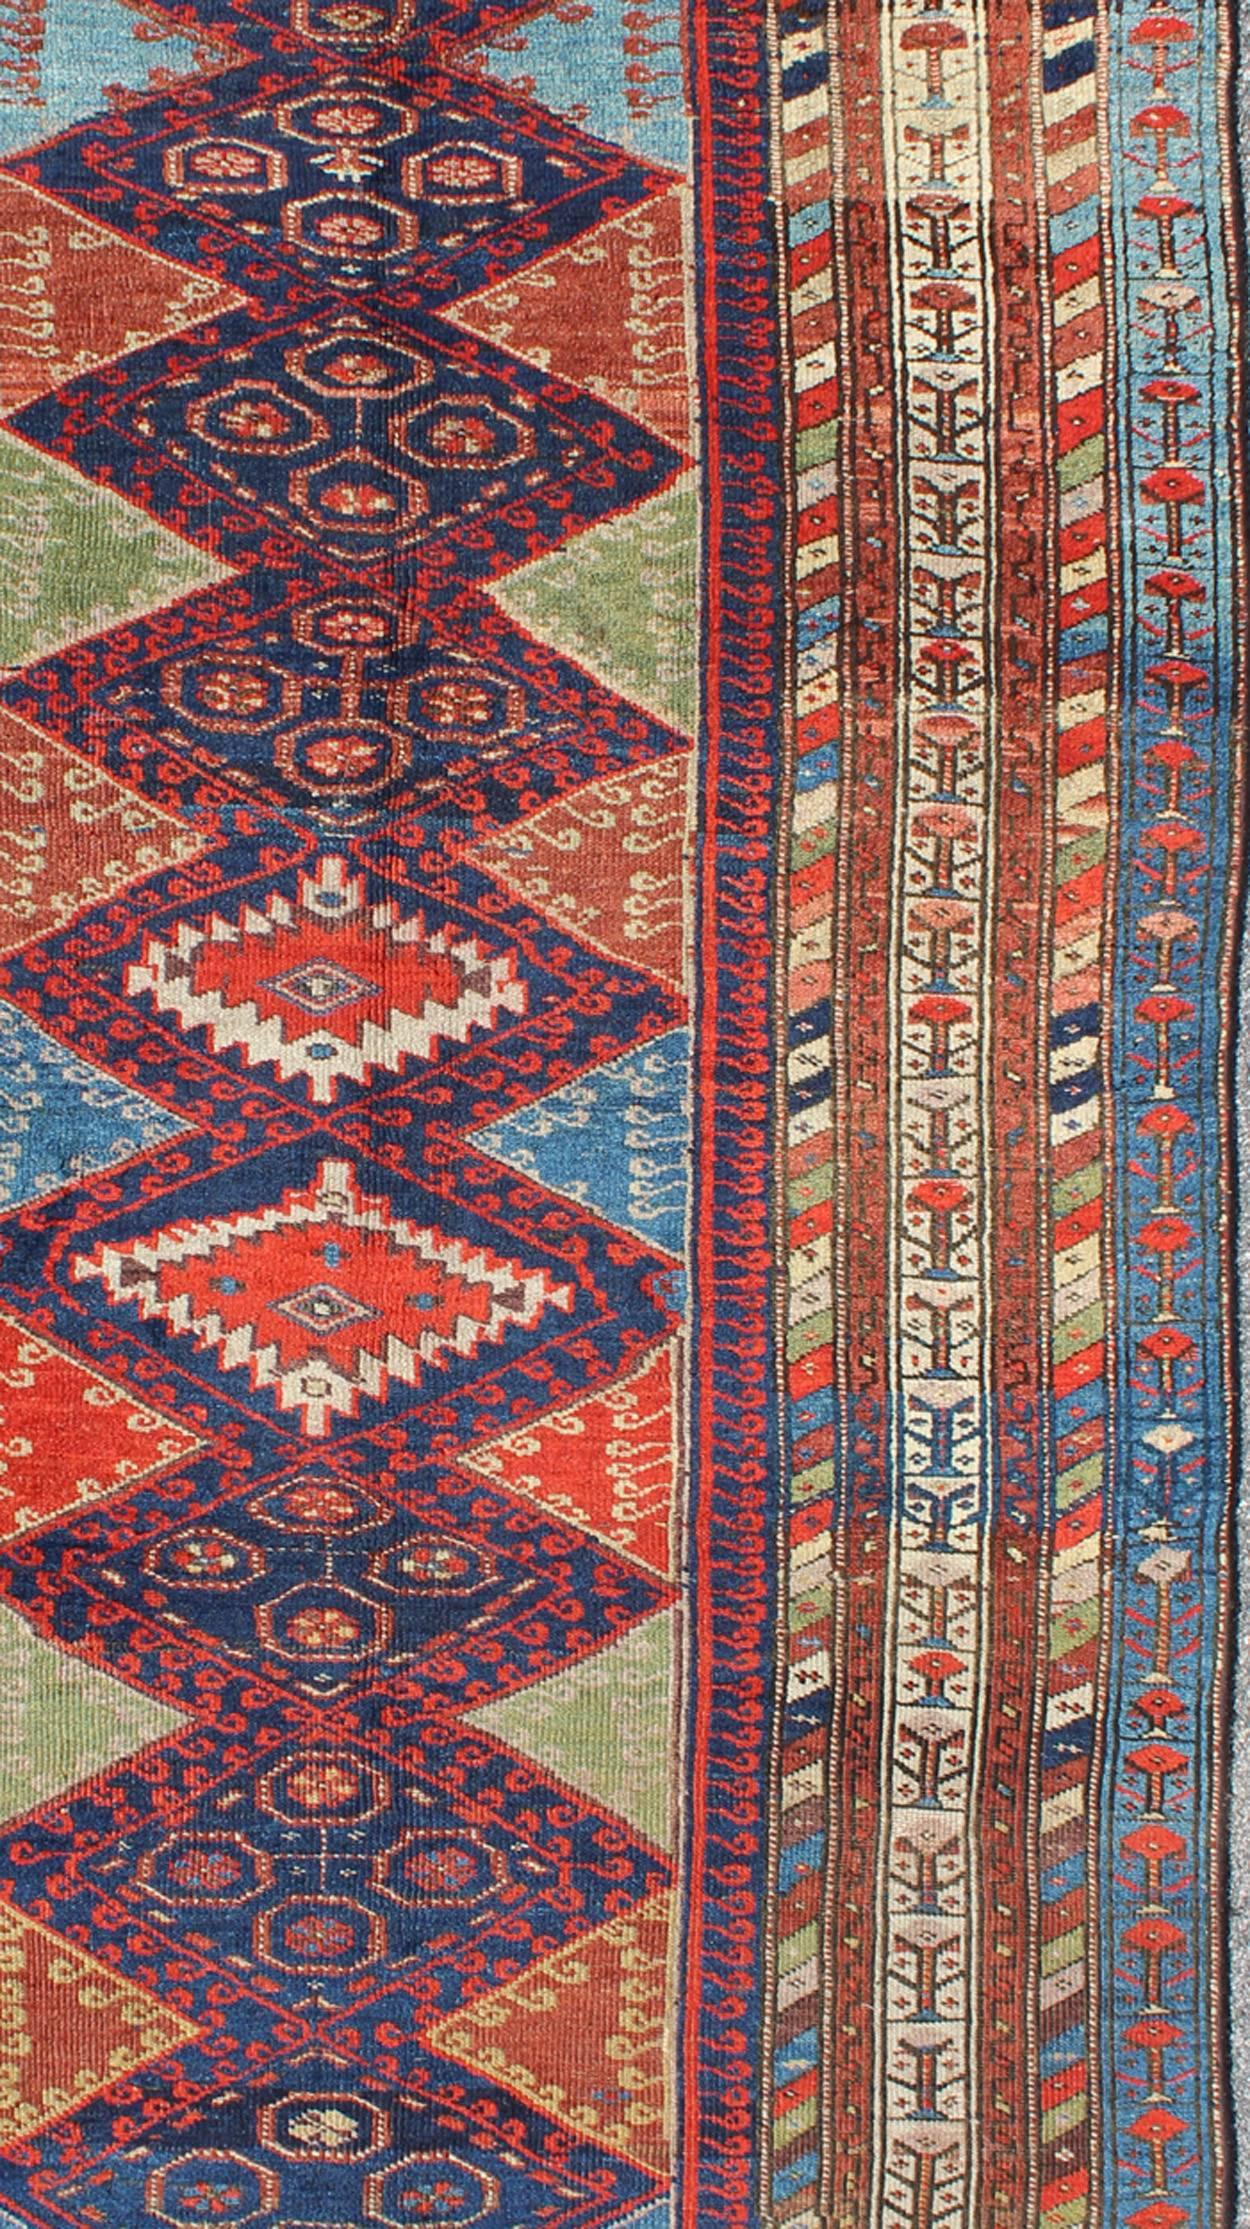 Hand-Knotted Antique Kurdish Kazak with Tribal and Geometric Motifs In Blue, red & Green For Sale